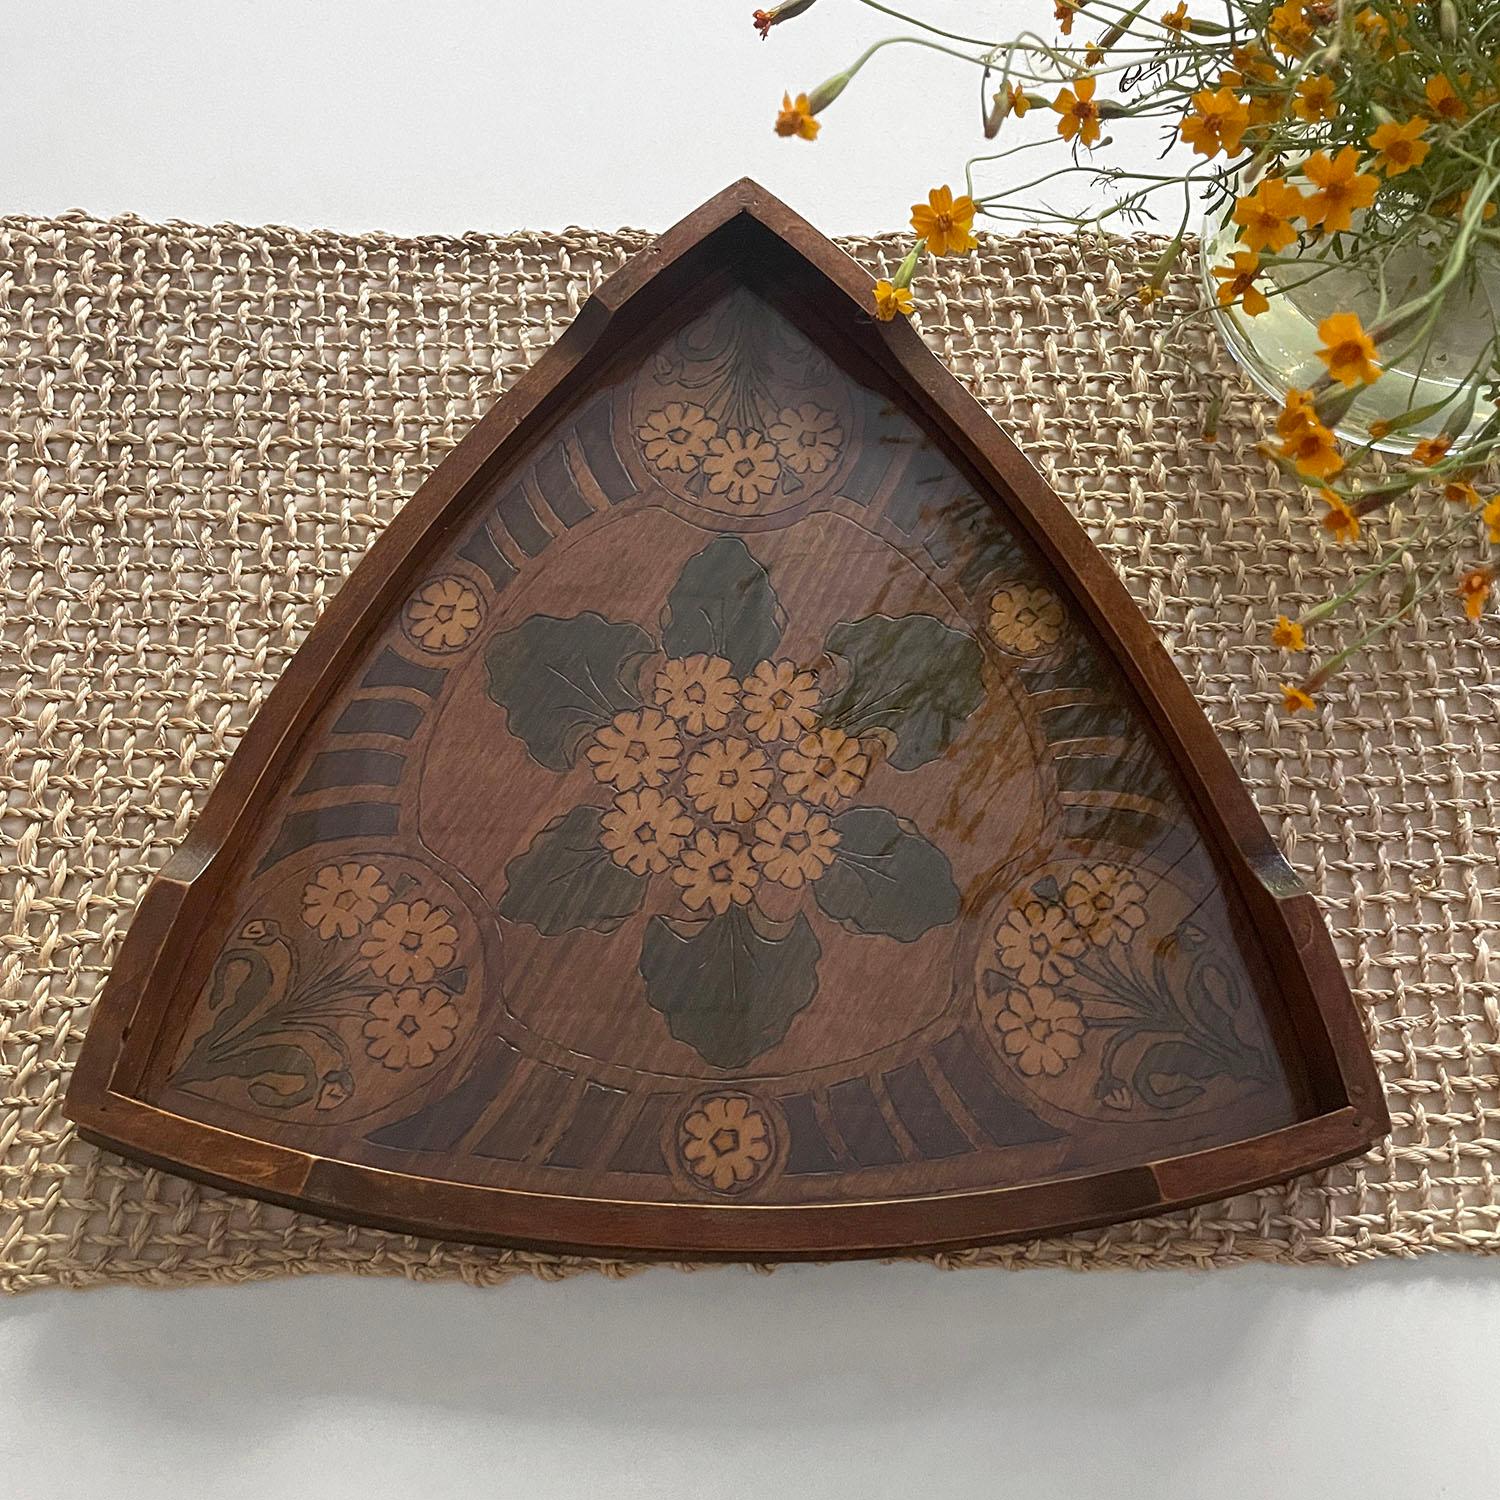 Antique French Oak tray
Sculpted triangular wood
Lovely pyroengraved and glazed floral motifs 
Original glass
Patina from age and use 
Last photo is for reference only
Please see other listings